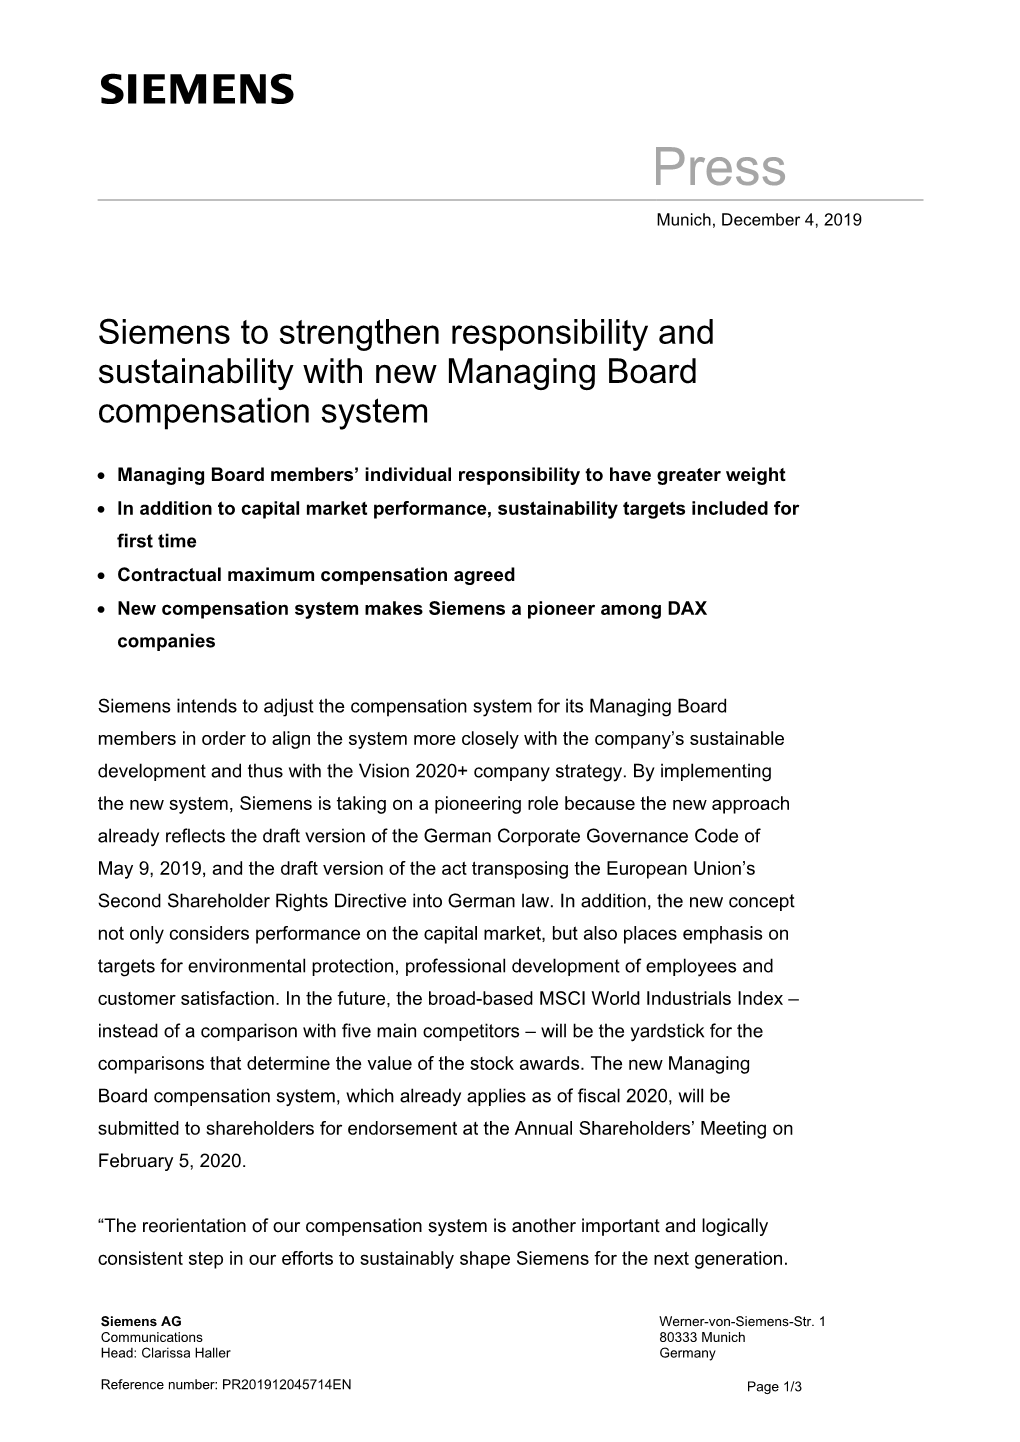 Siemens to Strengthen Responsibility and Sustainability with New Managing Board Compensation System